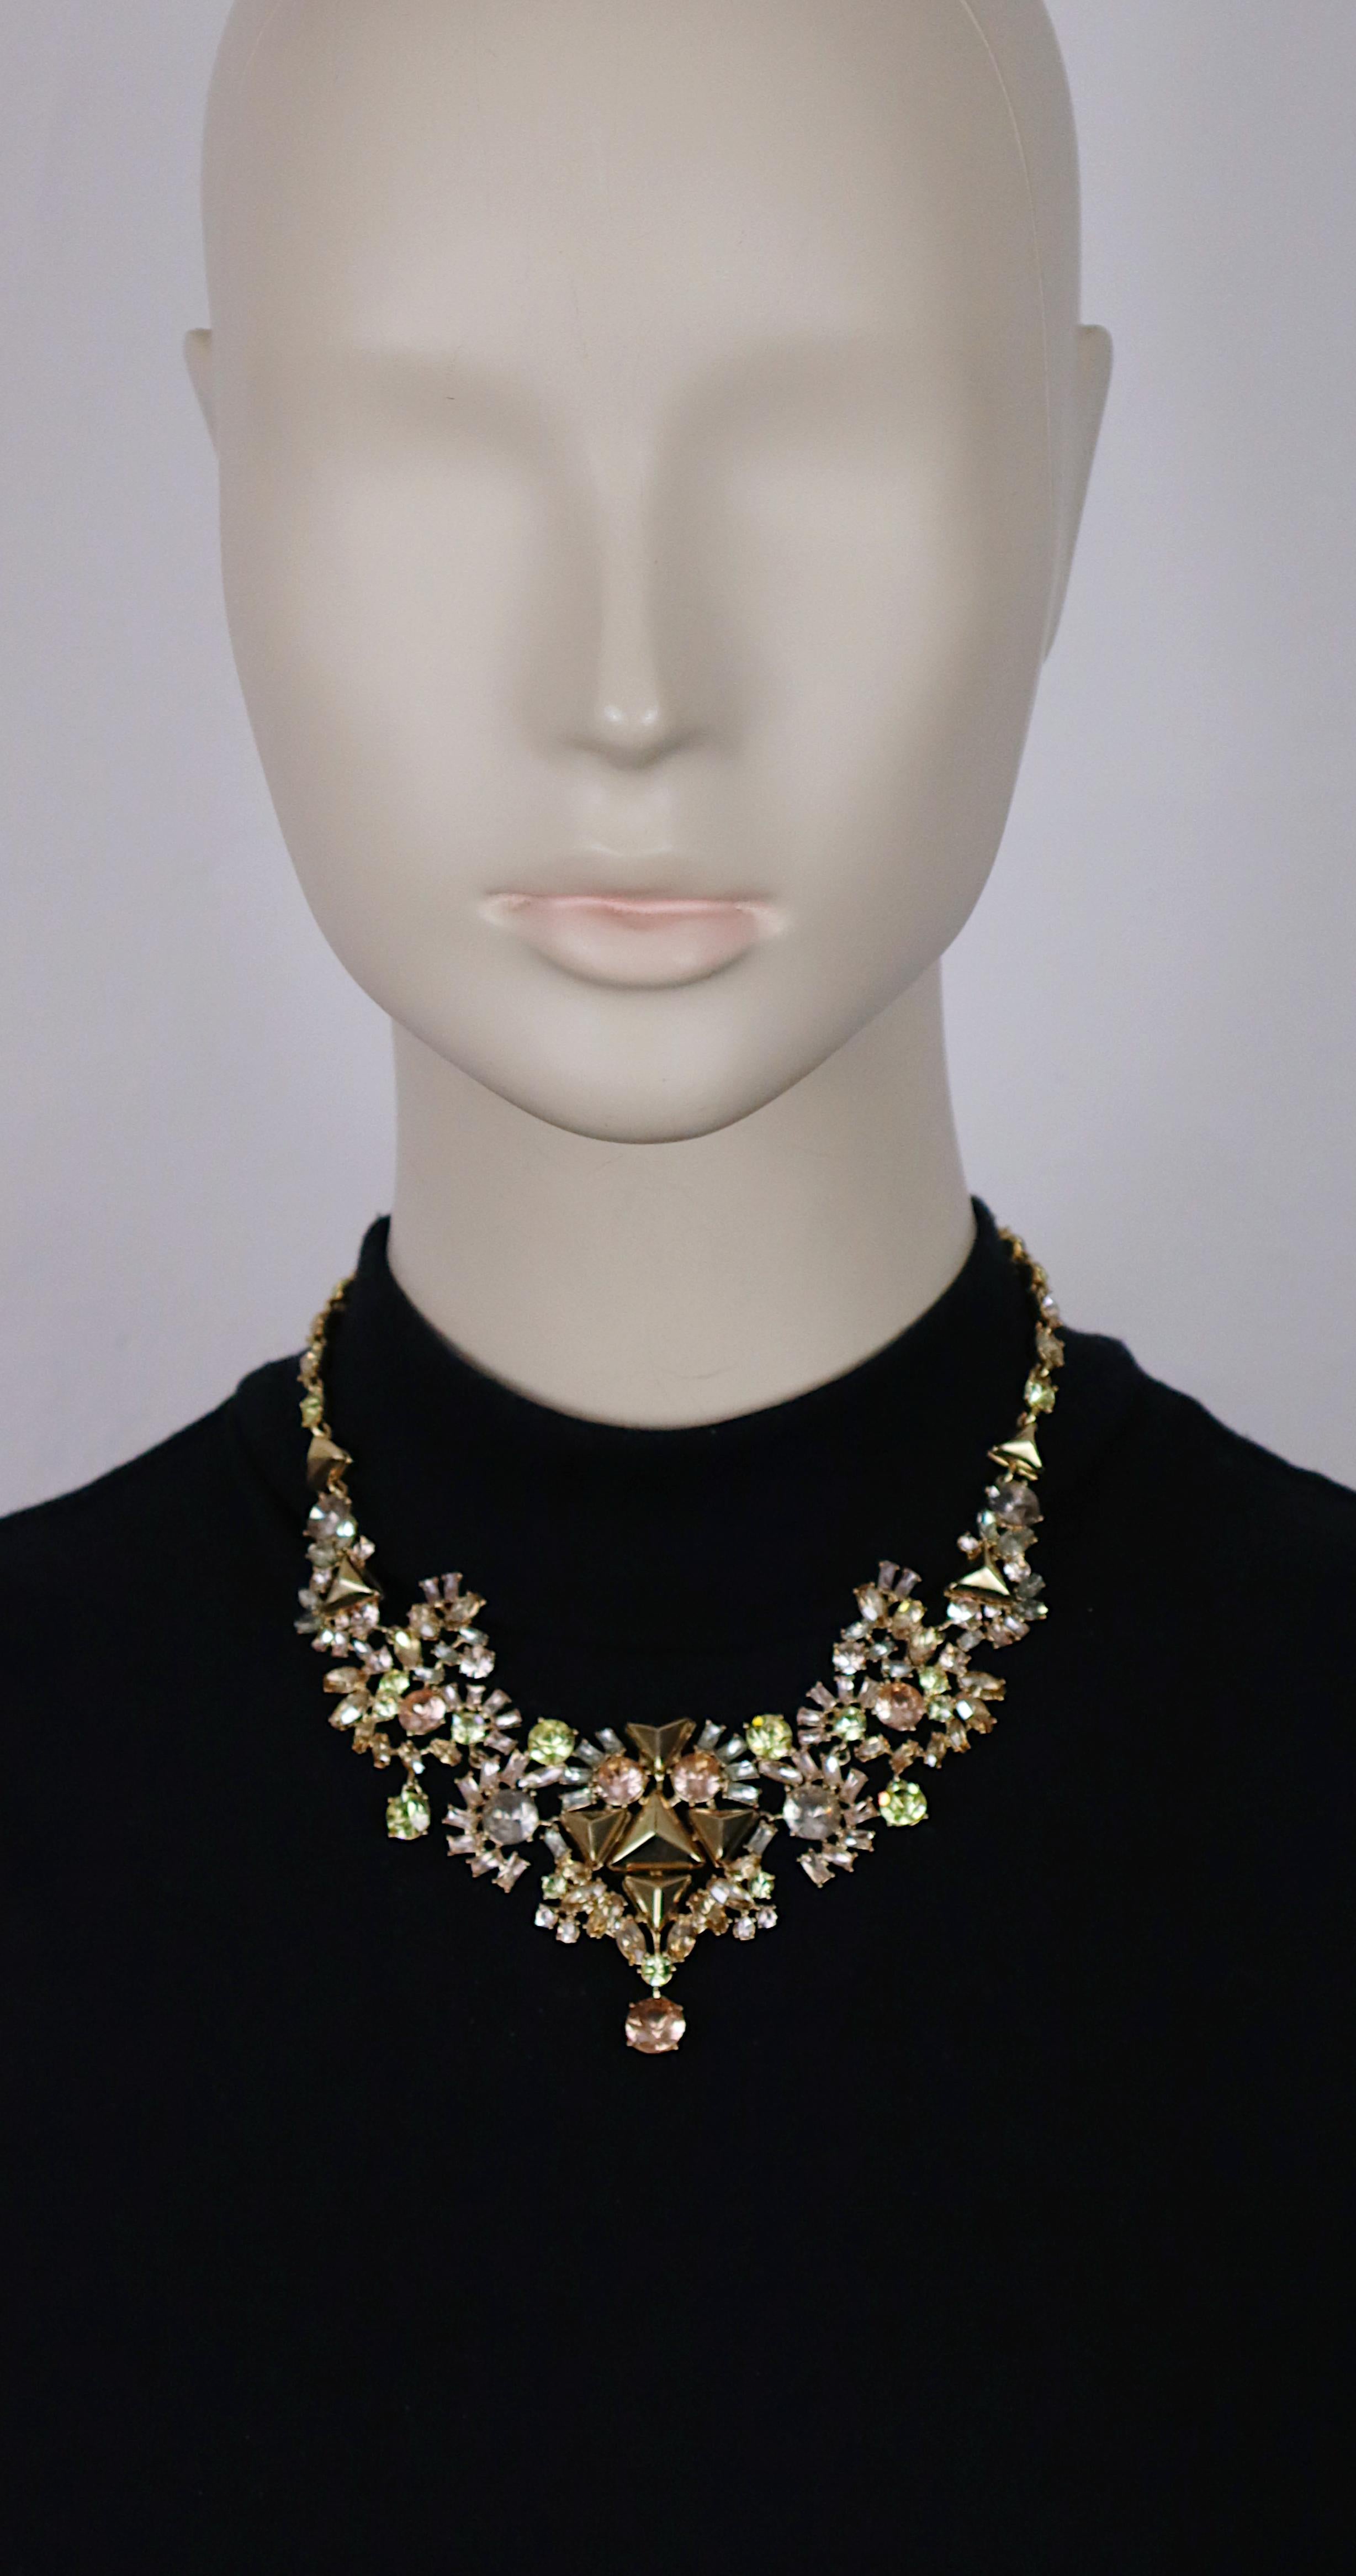 GIVENCHY gold tone necklace embellished with multicolor crystals.

Fold over clasp closure.

Embossed GIVENCHY on the clasp.

Indicative measurements : adjustable length from approx. 42 cm (16.54 inches) to approx. 47 cm (18.50 inches) / max. width